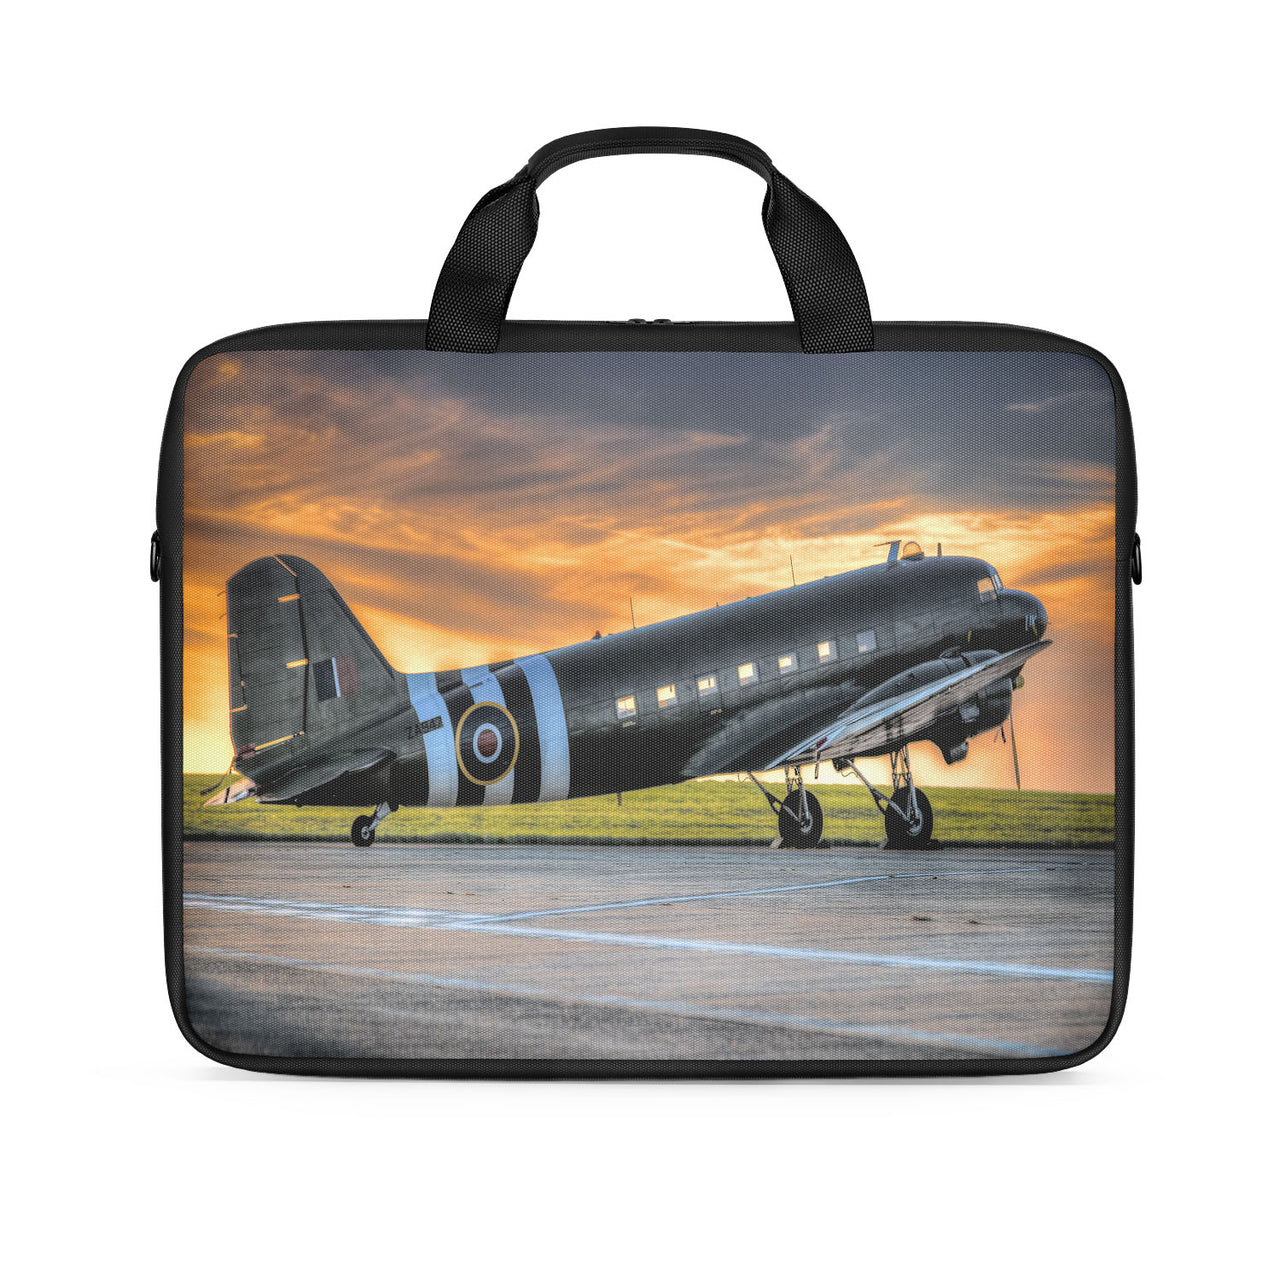 Old Airplane Parked During Sunset Designed Laptop & Tablet Bags